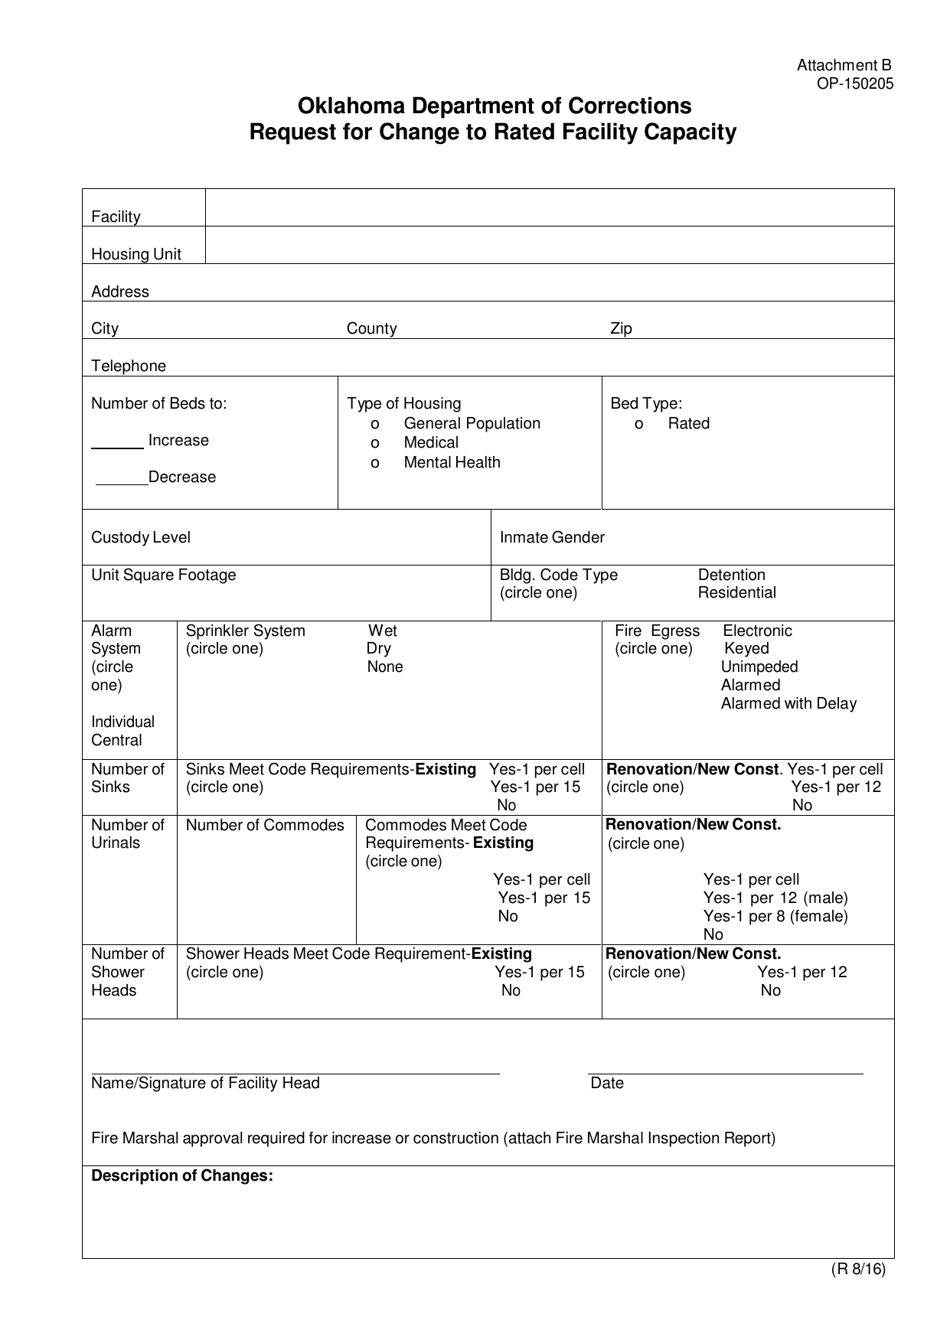 DOC Form OP-150205 Attachment B Request for Change to Rated Facility Capacity - Oklahoma, Page 1